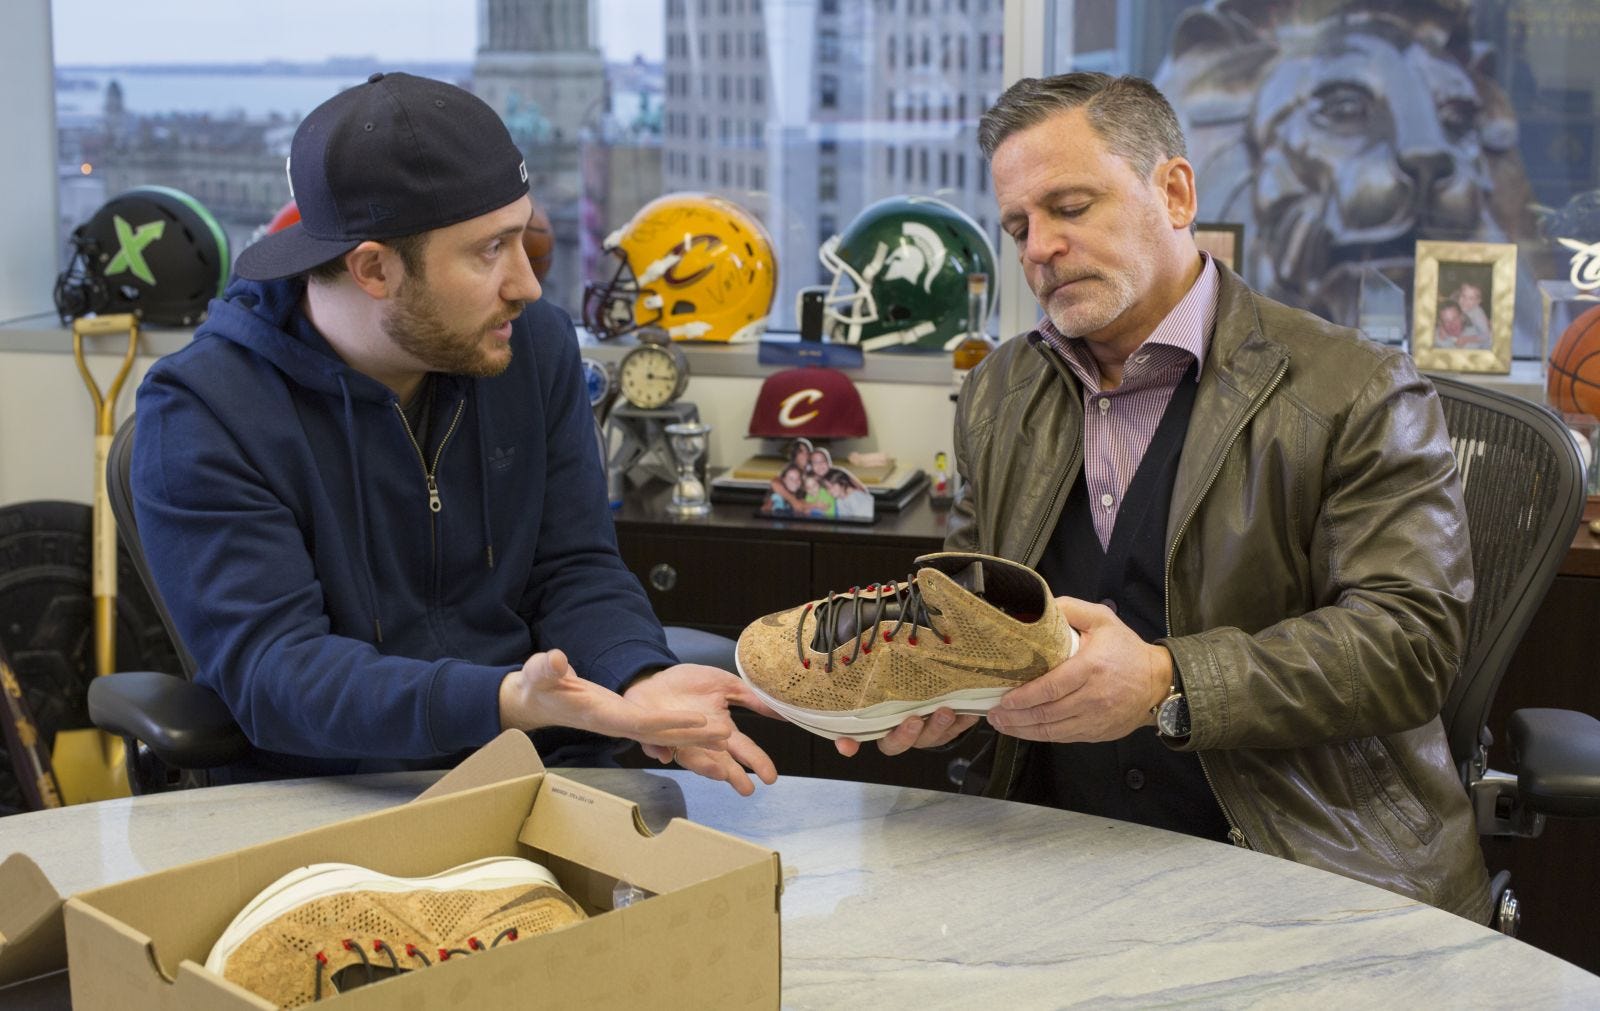 StockX on X: See how we authenticated this $70,000 Louis Vuitton